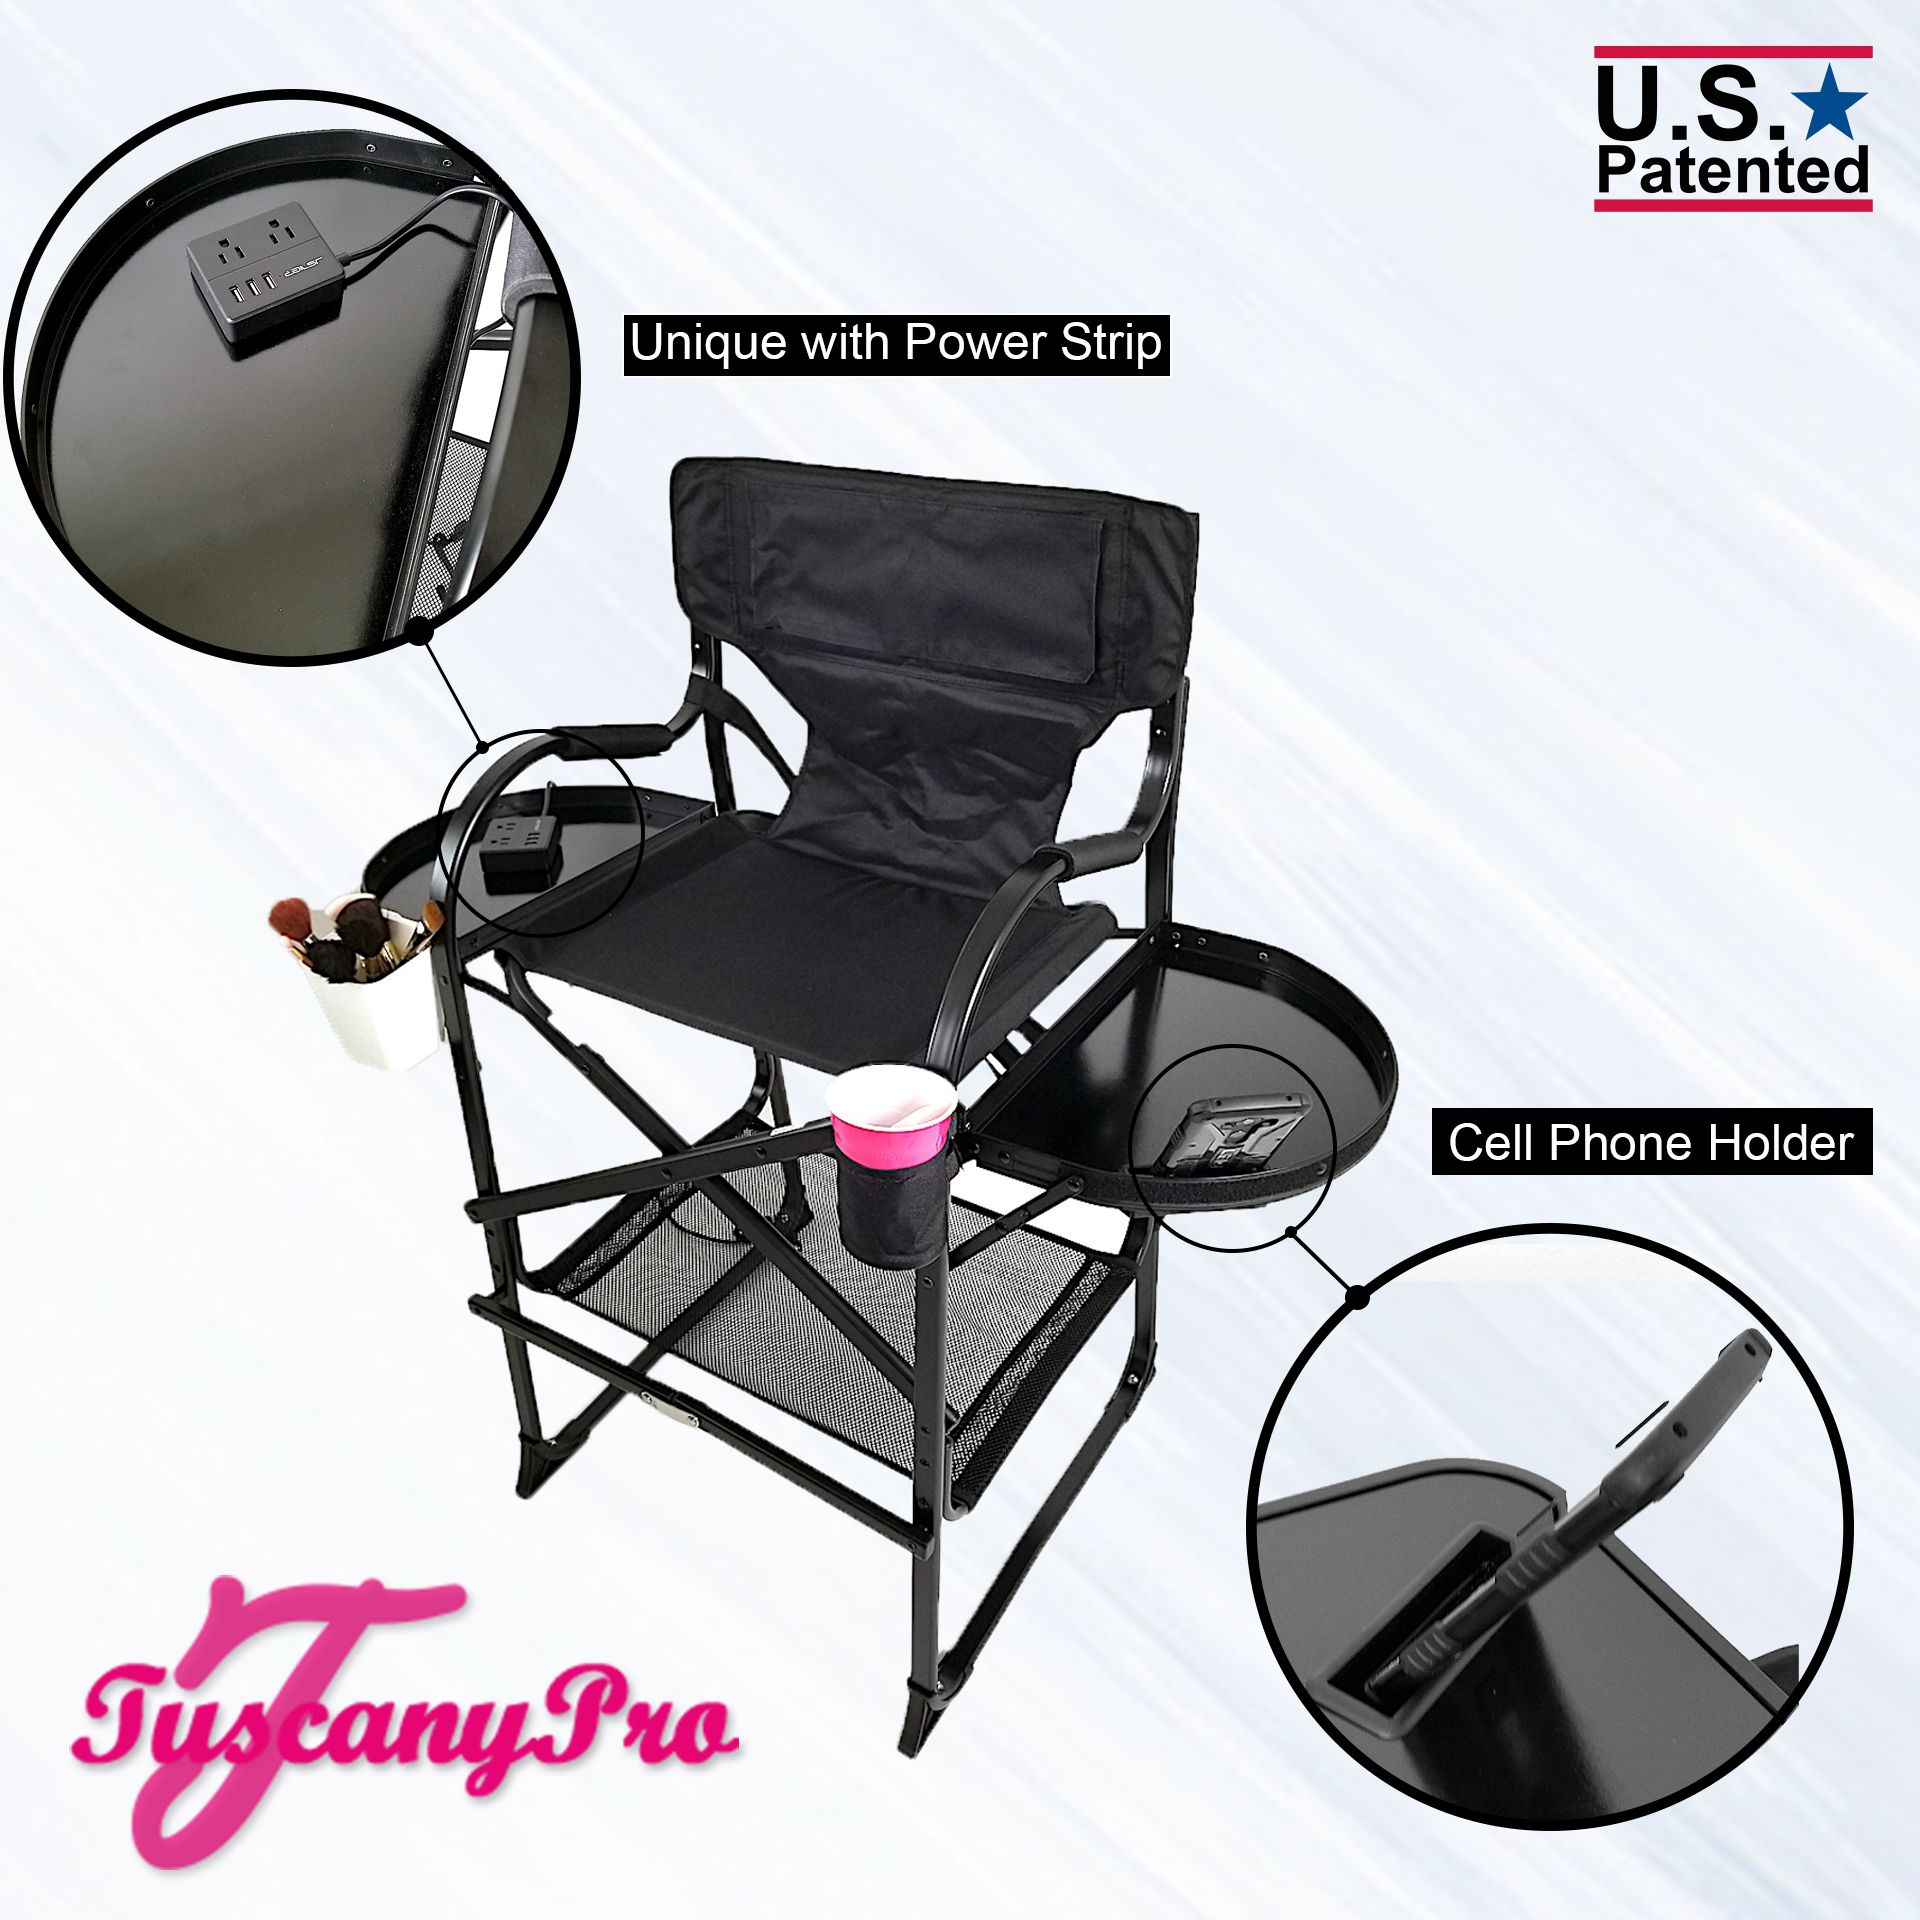 TuscanyPro Makeup And Hair Chair - Power Strip Package